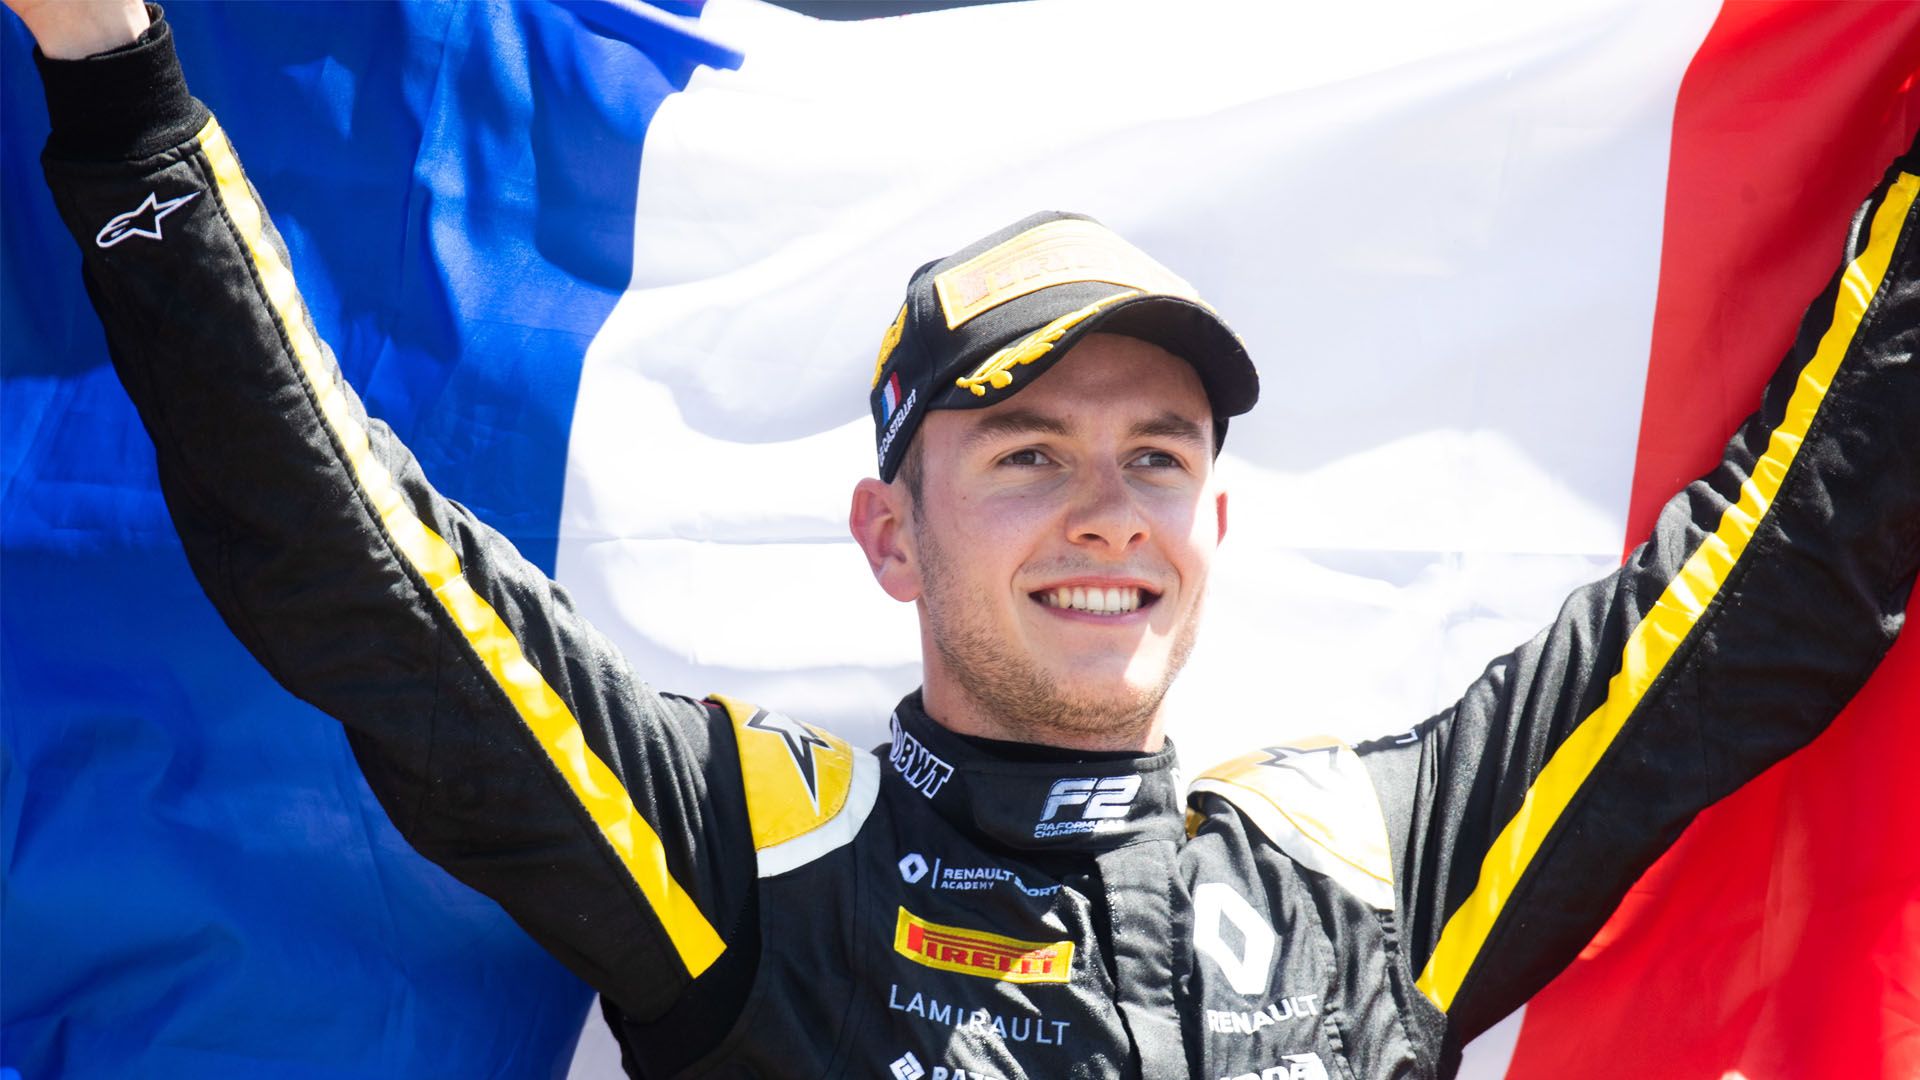 Tributes pour in for Anthoine Hubert from racing world. Formula 1®